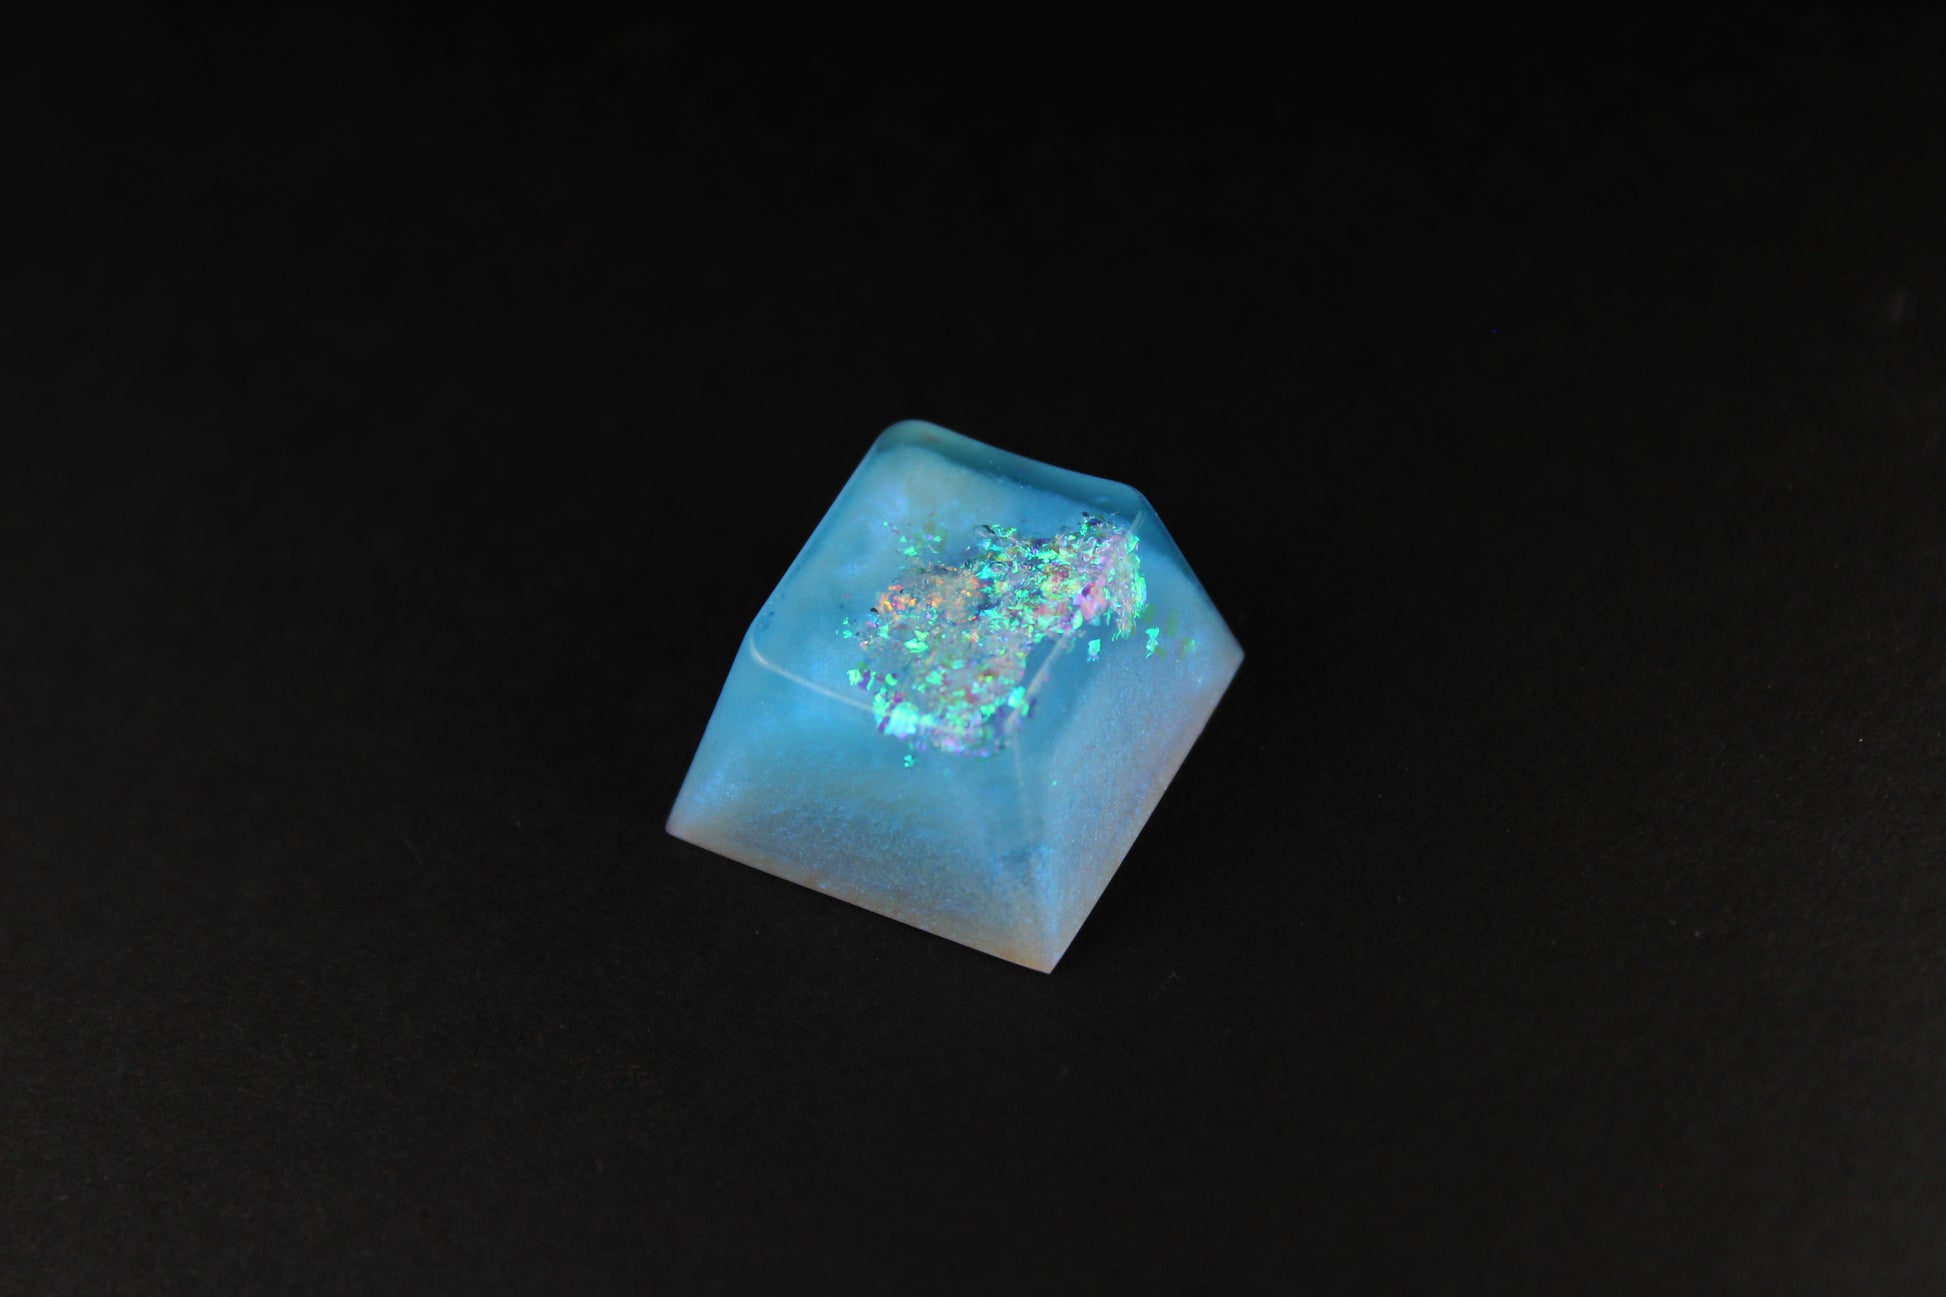 Cherry Esc - Glacial Ice - PrimeCaps Keycap - Blank and Sculpted Artisan Keycaps for cherry MX mechanical keyboards 